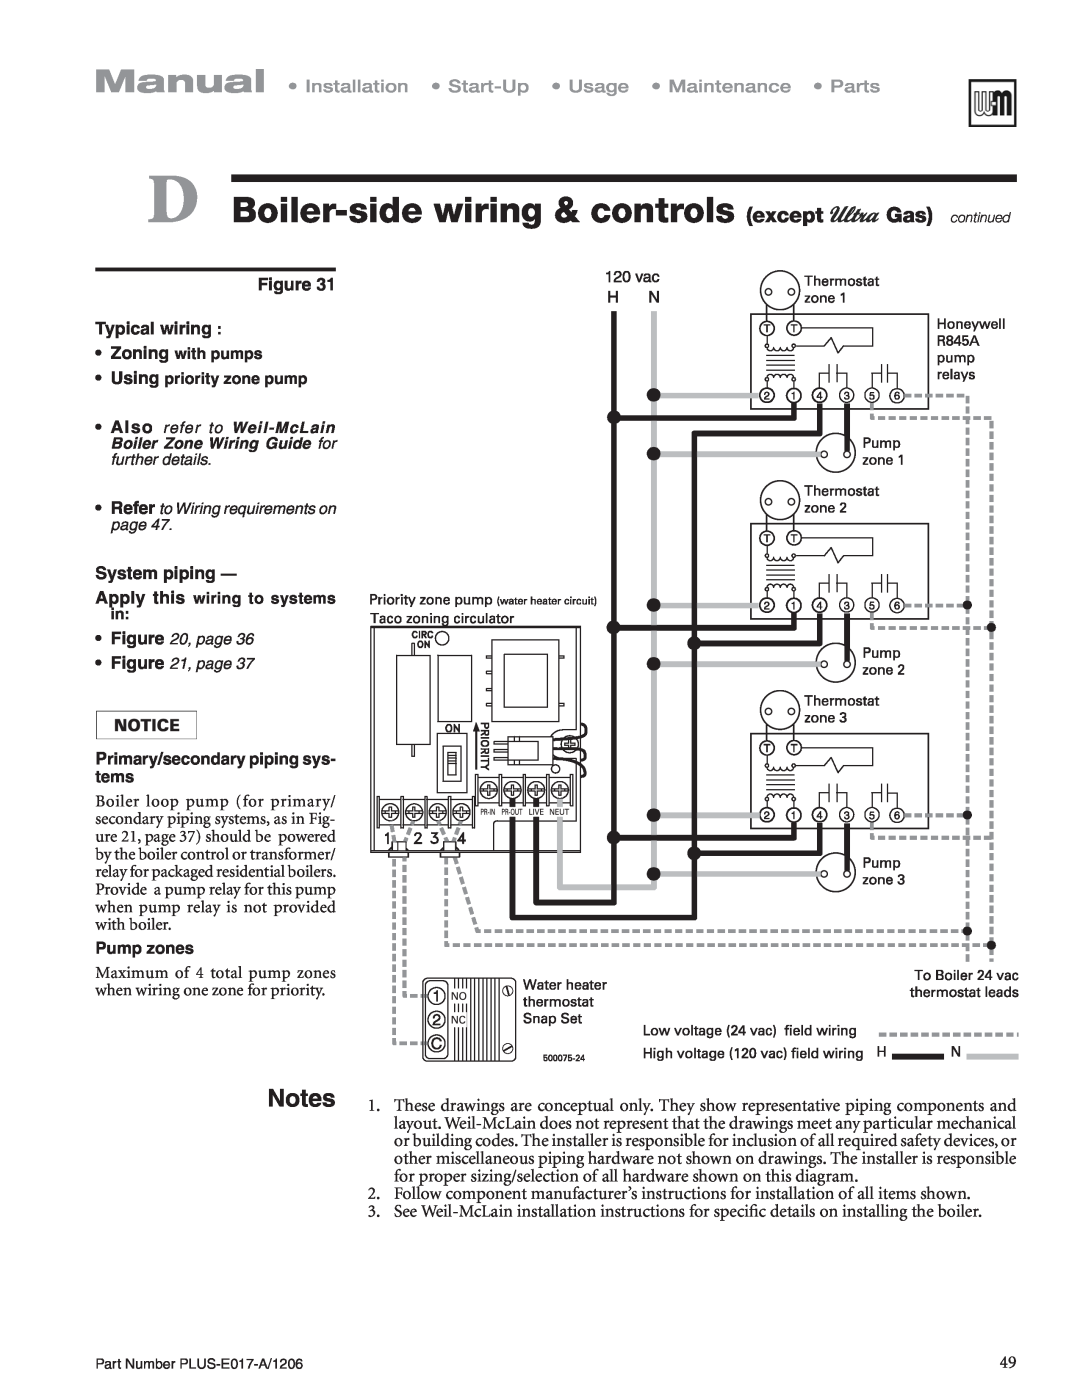 Weil-McLain PLUS-E017-A/1206 manual Figure Typical wiring, Primary/secondary piping sys- tems, Pump zones, System piping 